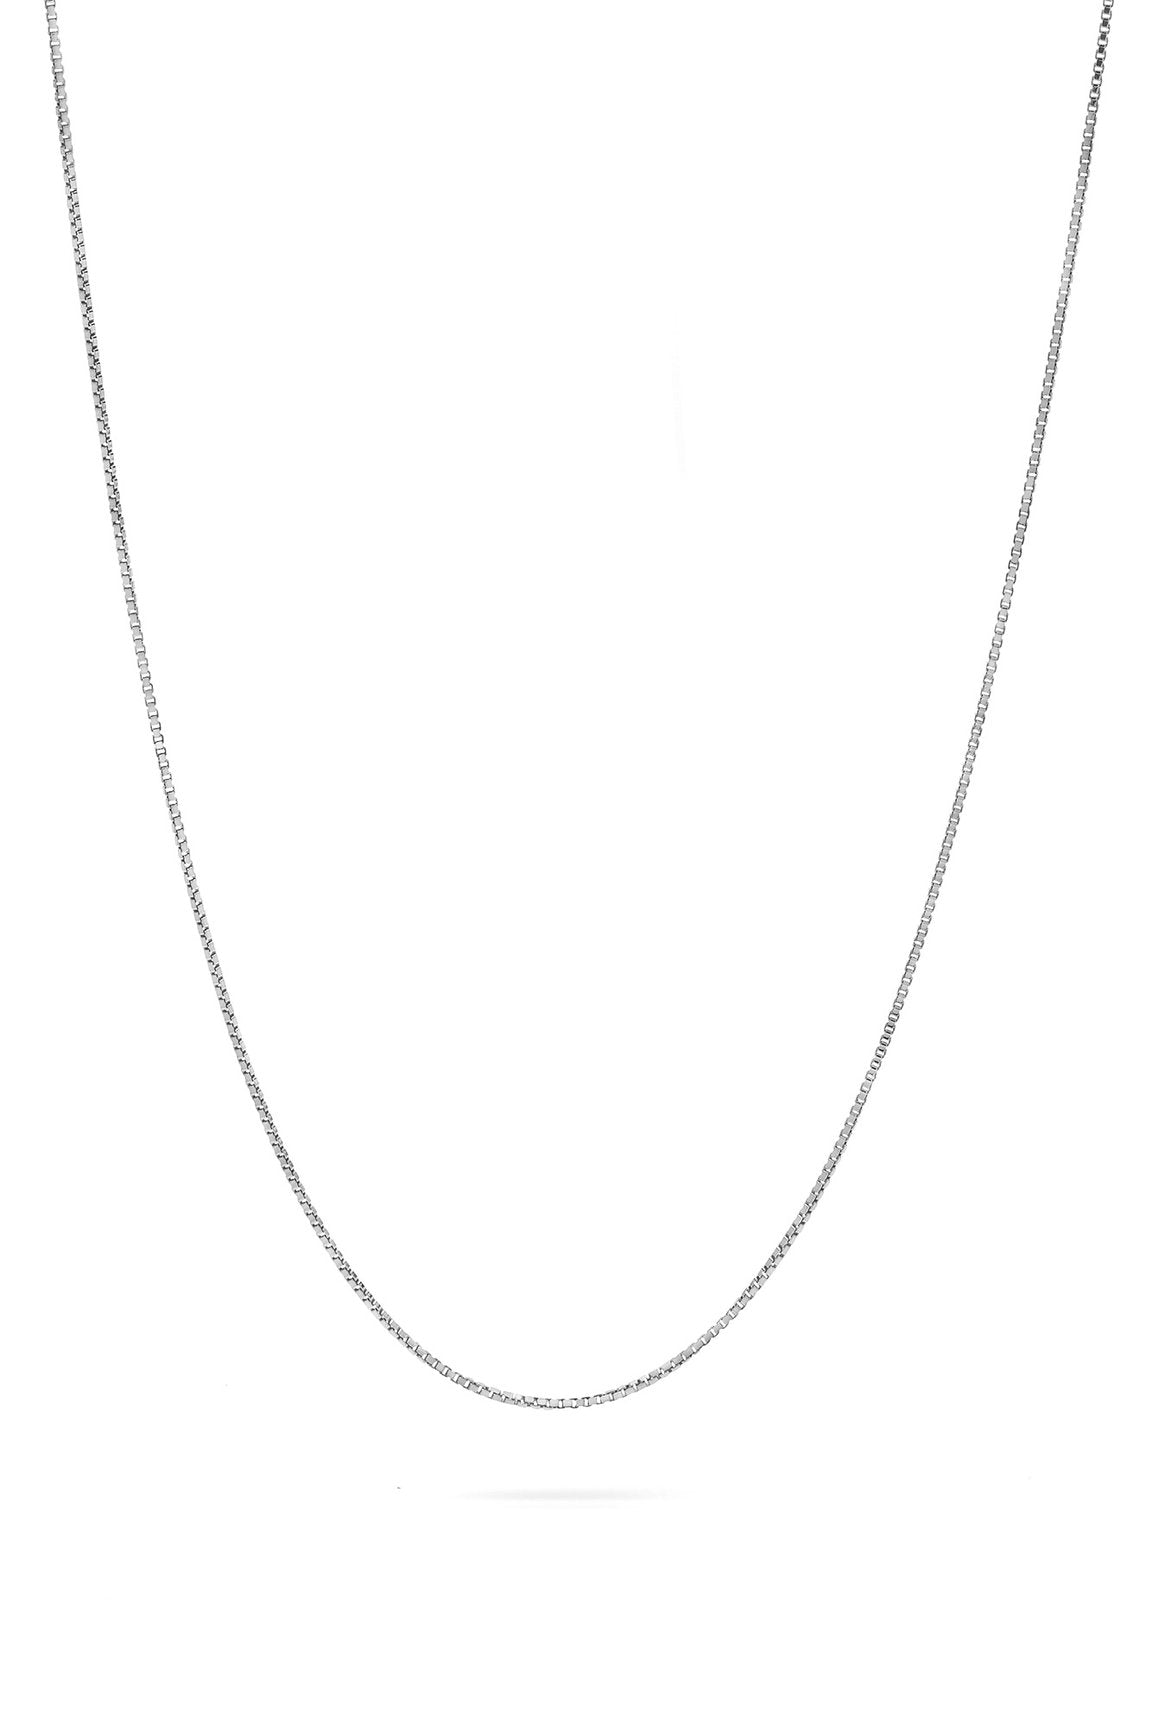 LONG SMOOTH NECKLACE IN SILVER - BEYOND STUDIOS